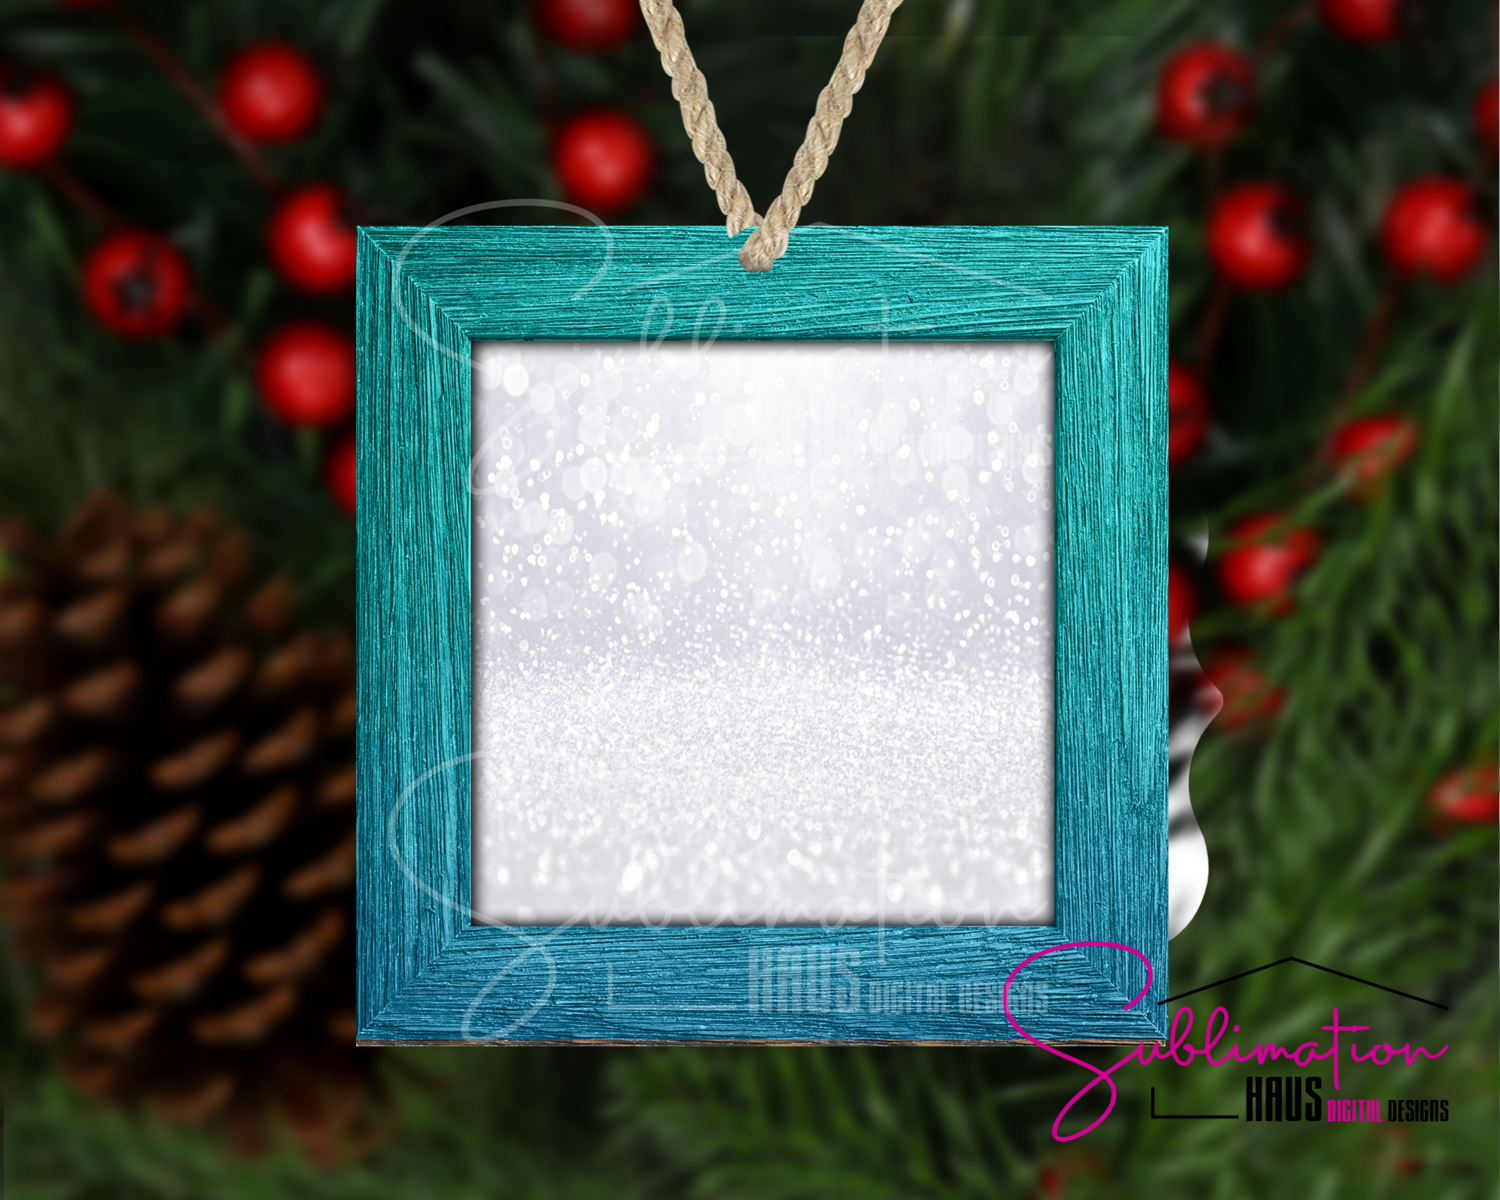 Colored Frame Teal - Winter Holiday Frame Ornament